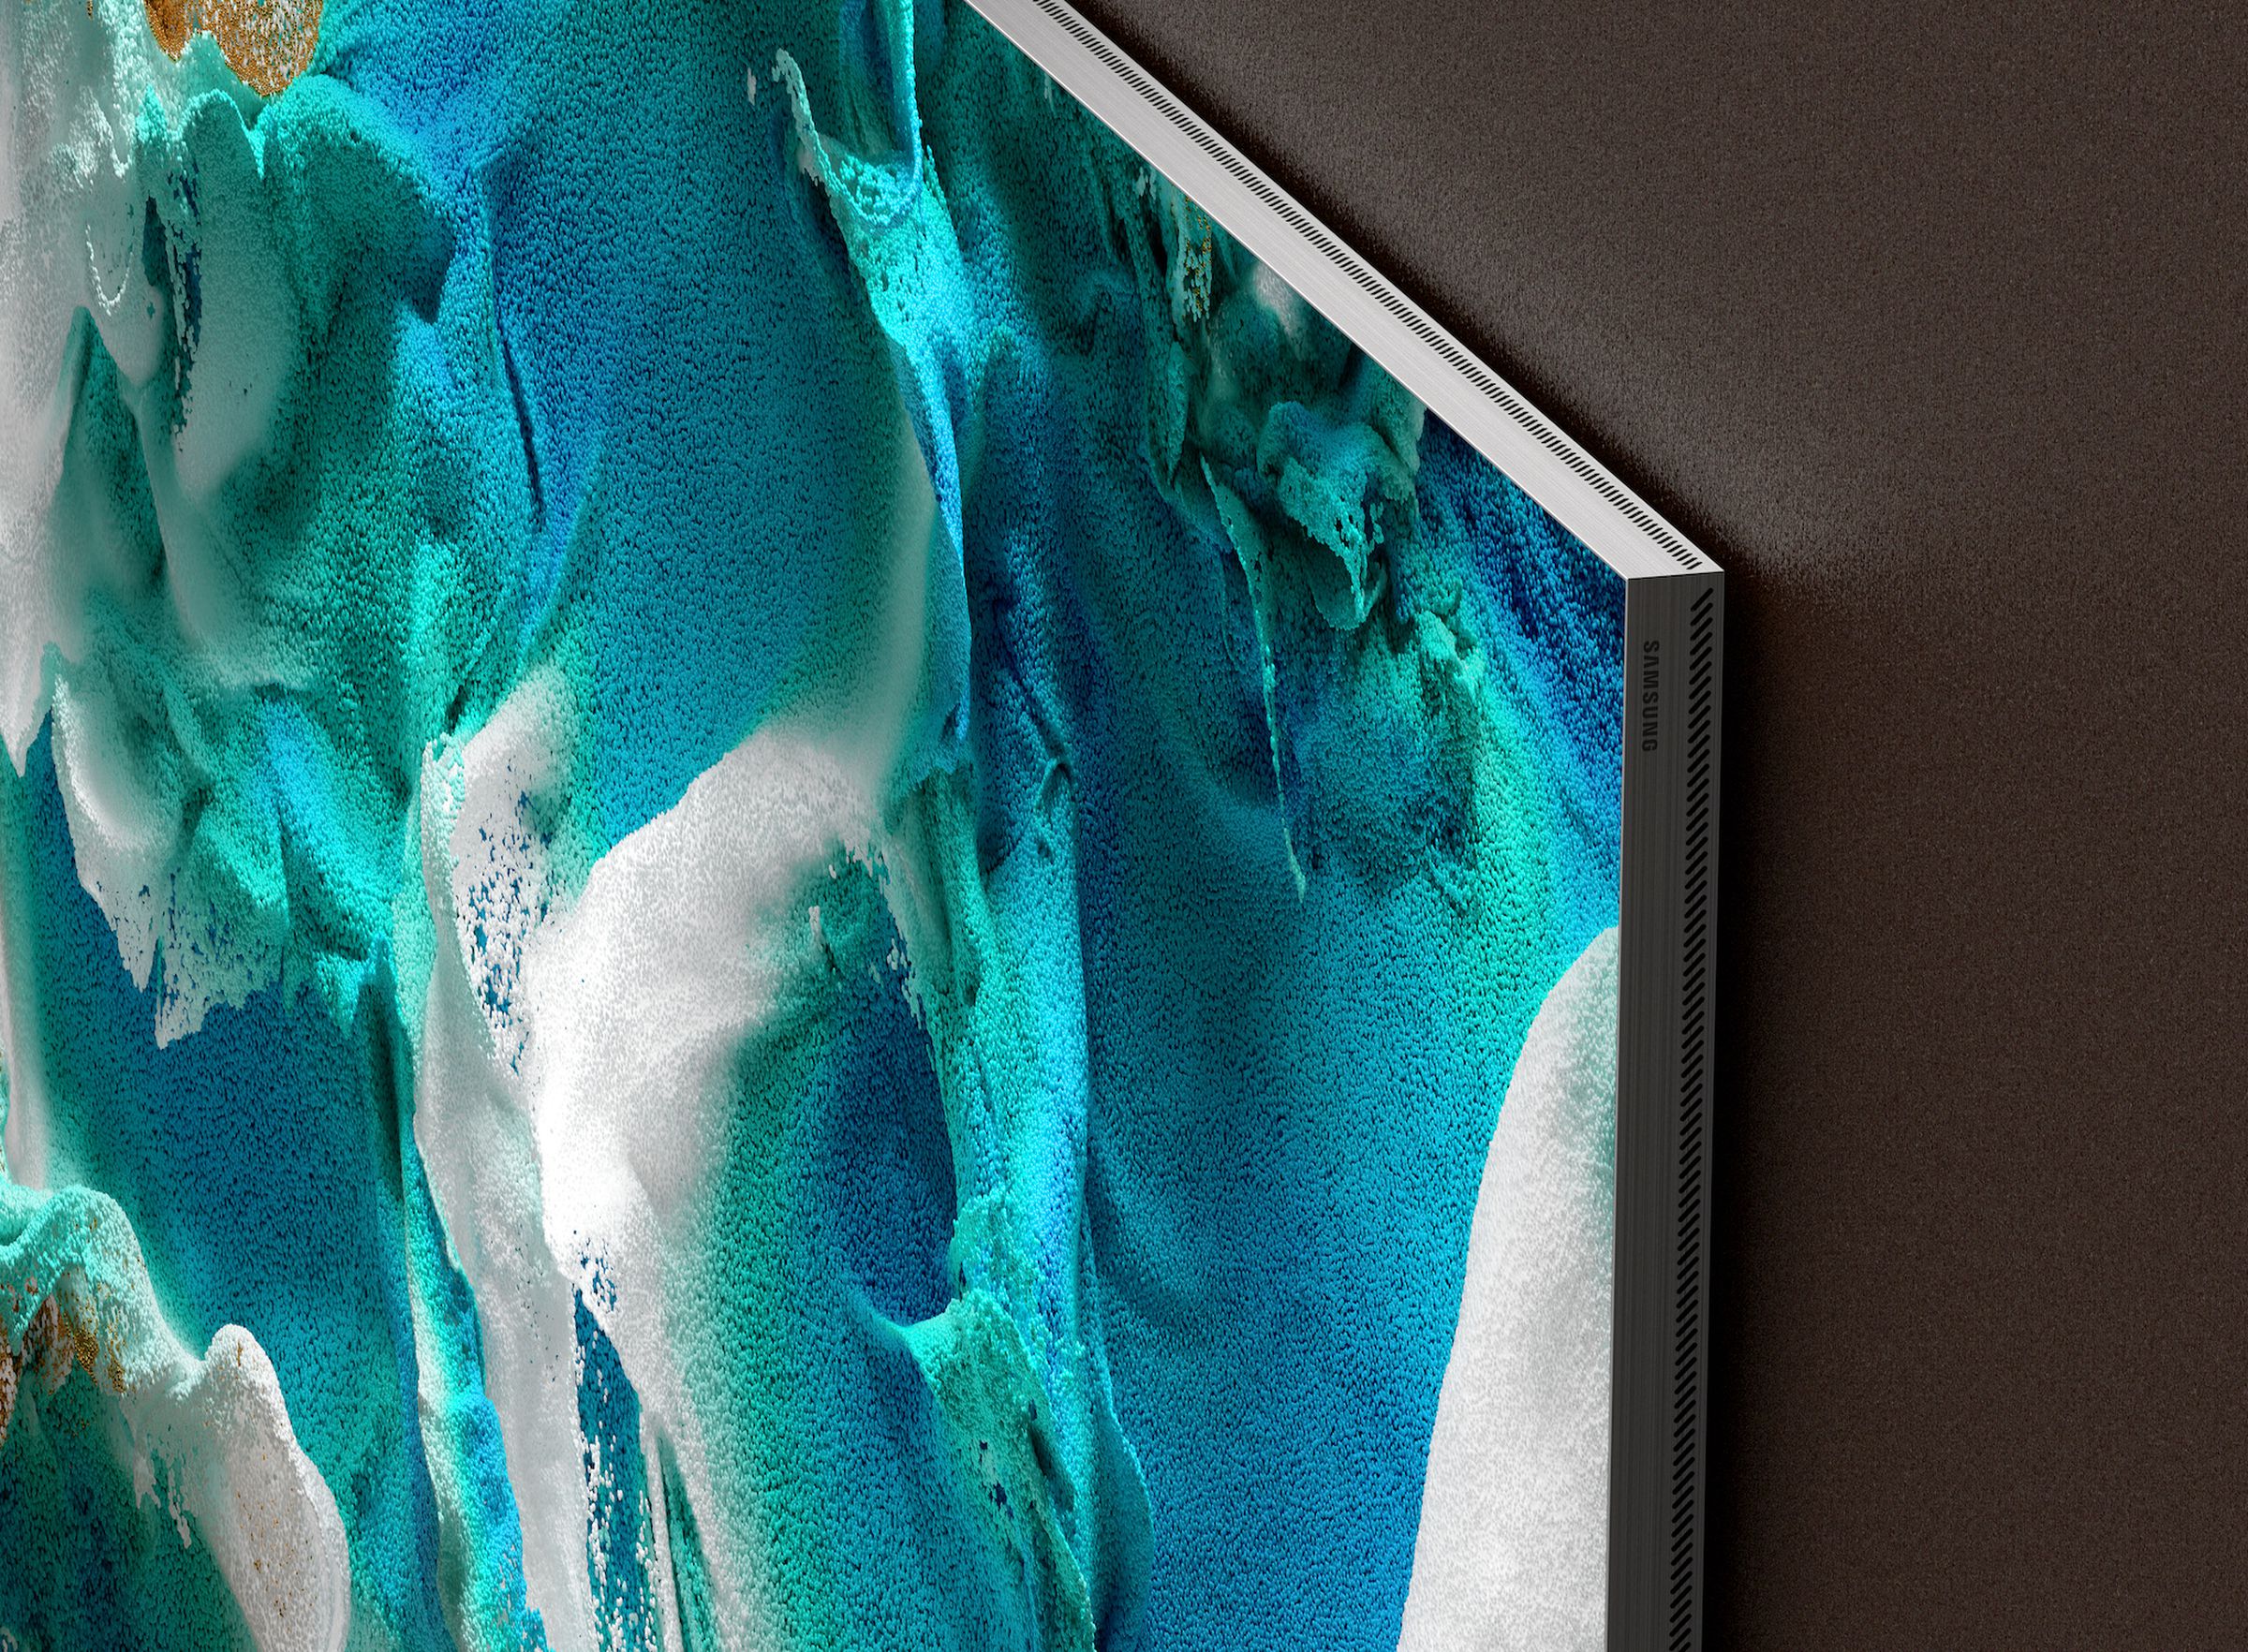 Samsung’s ultra-luxury MicroLED displays now have a bezel-free design.